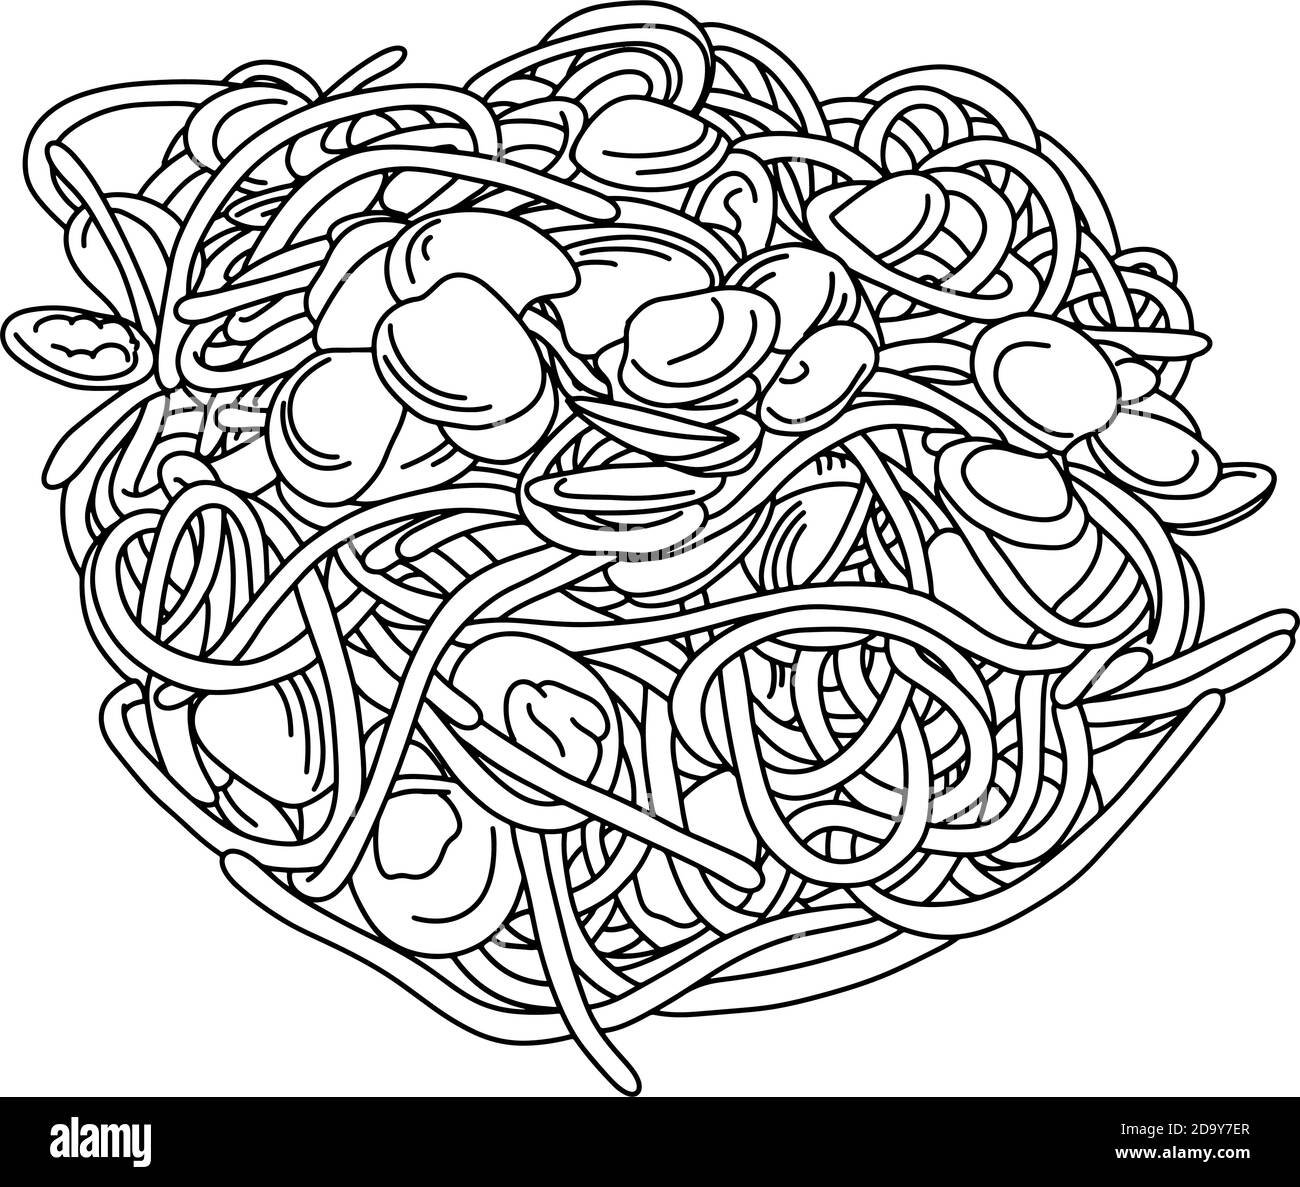 Spaghetti with clams vector illustration sketch doodle hand drawn with black lines isolated on white background Stock Vector